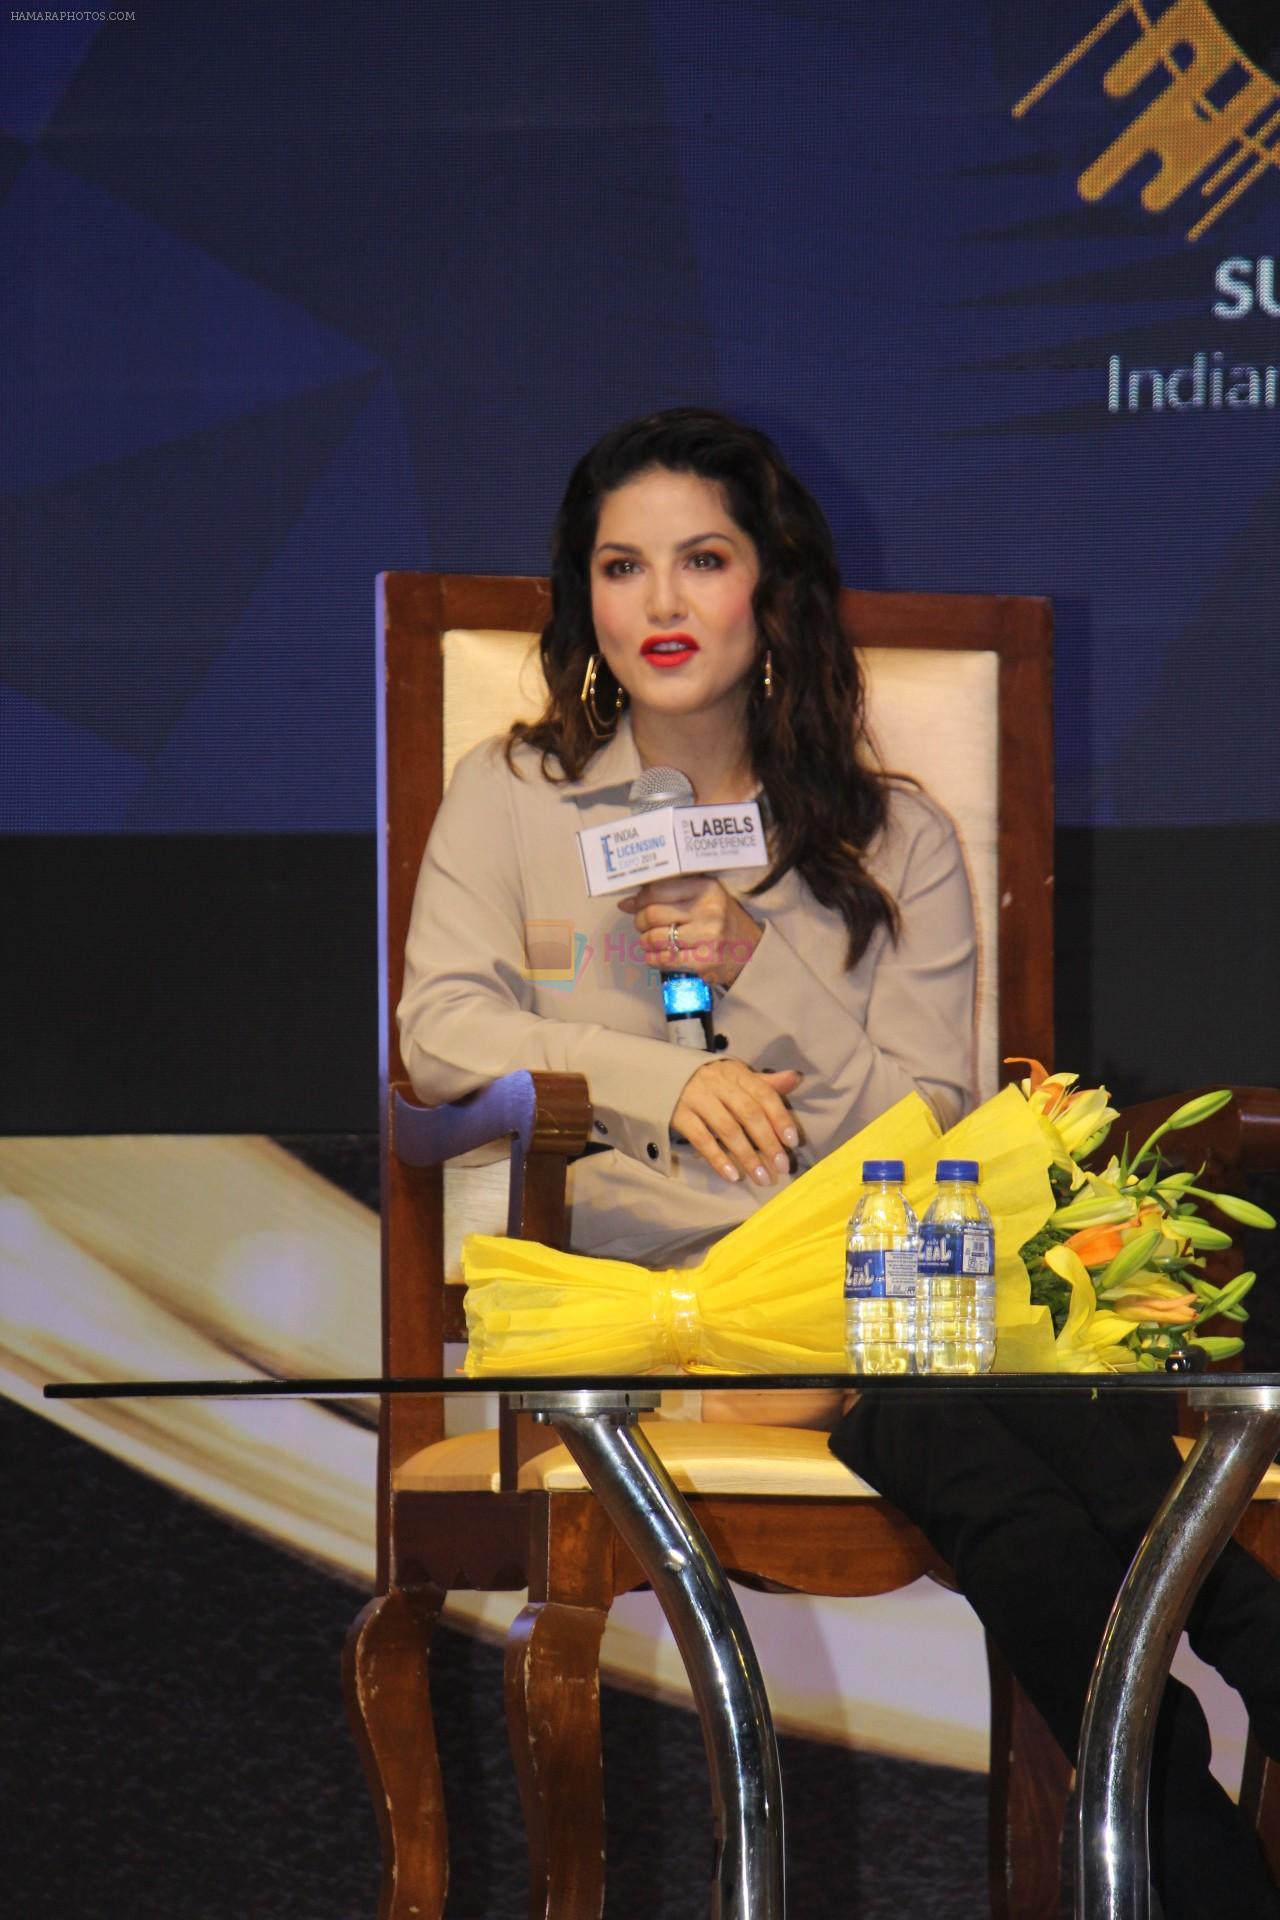 Sunny Leone unveils her fashion brand at India Licensing expo in goregaon on 8th July 2019